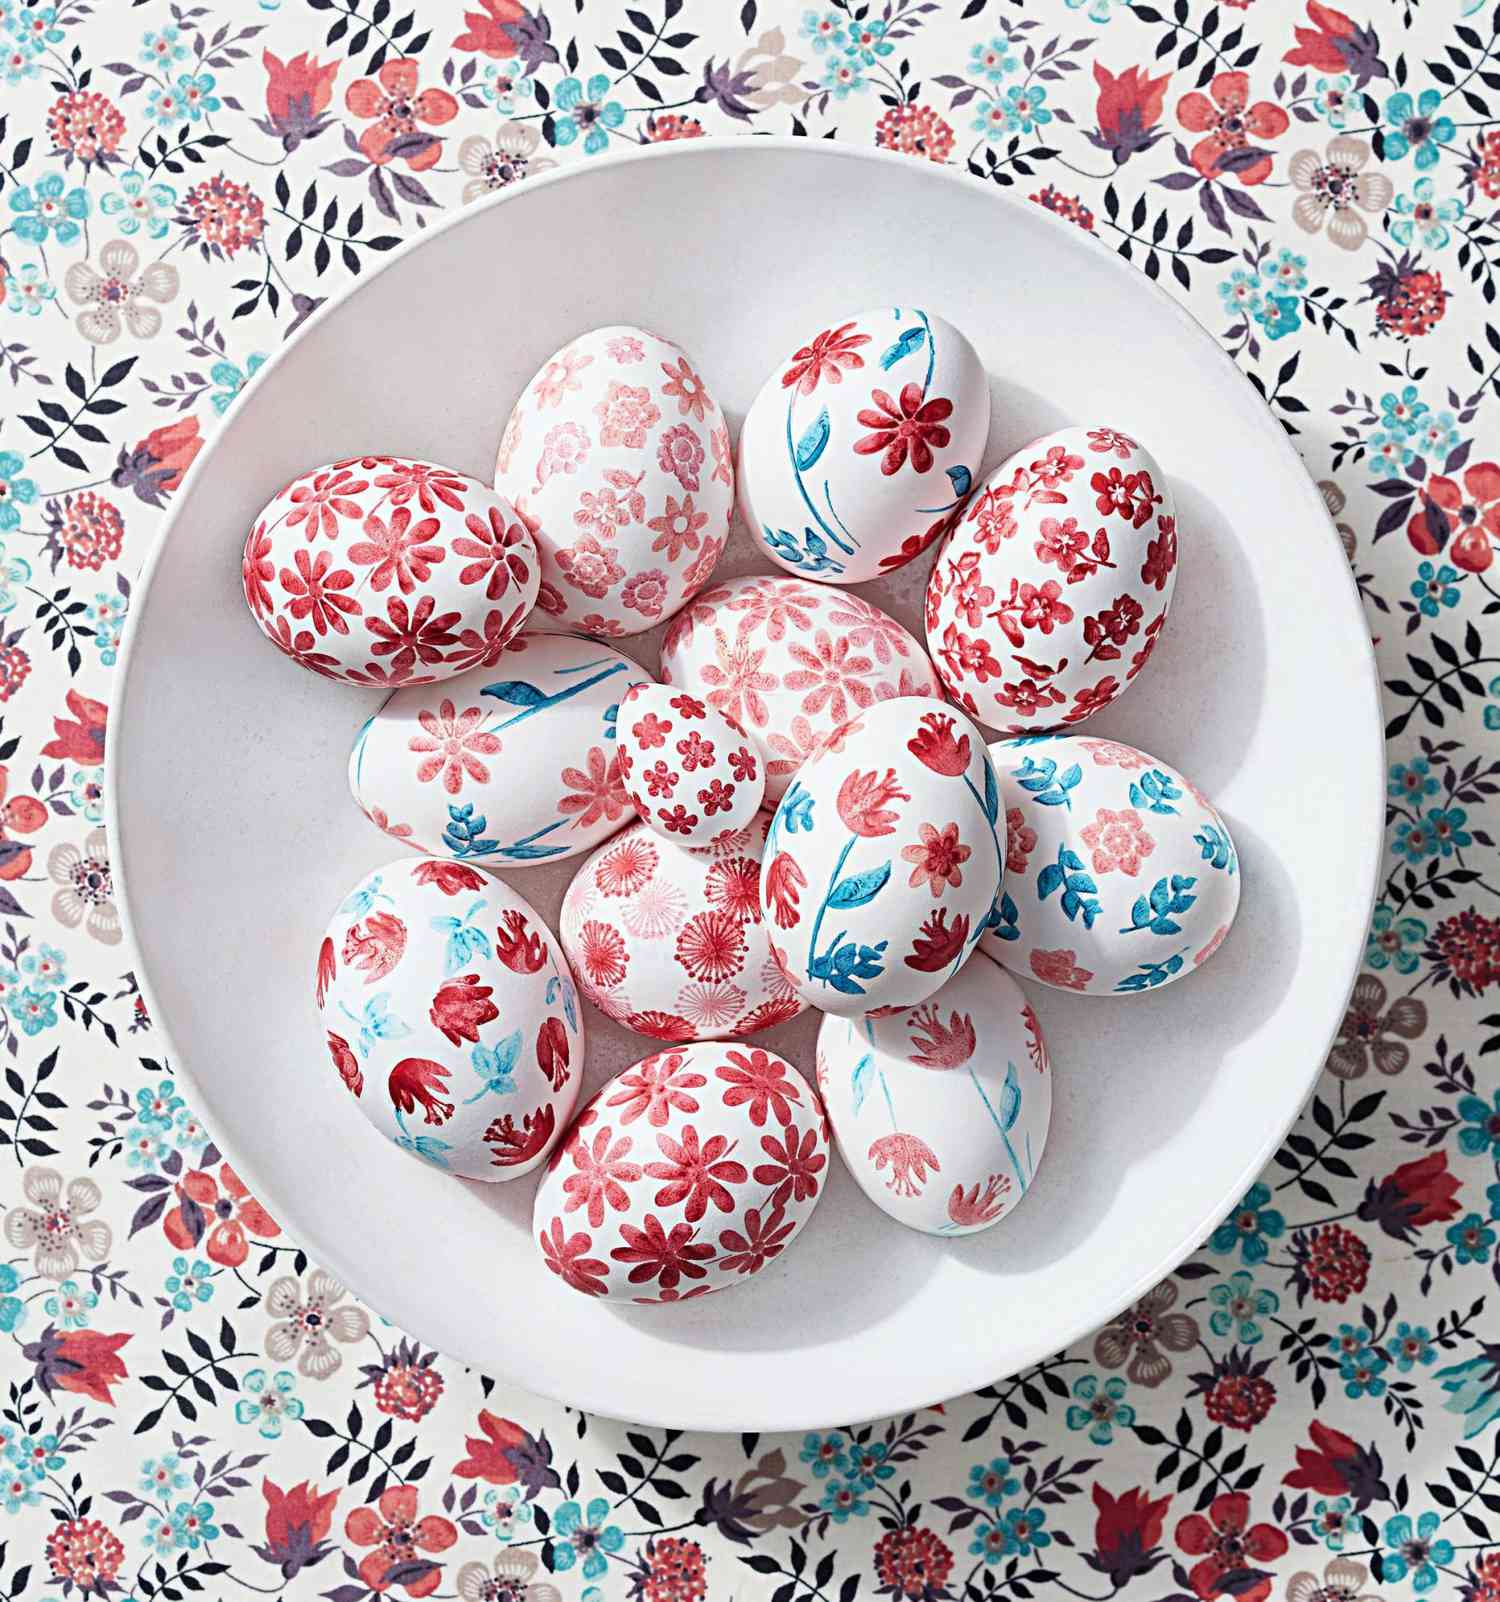 rubber stamped eggs liberty patriotic